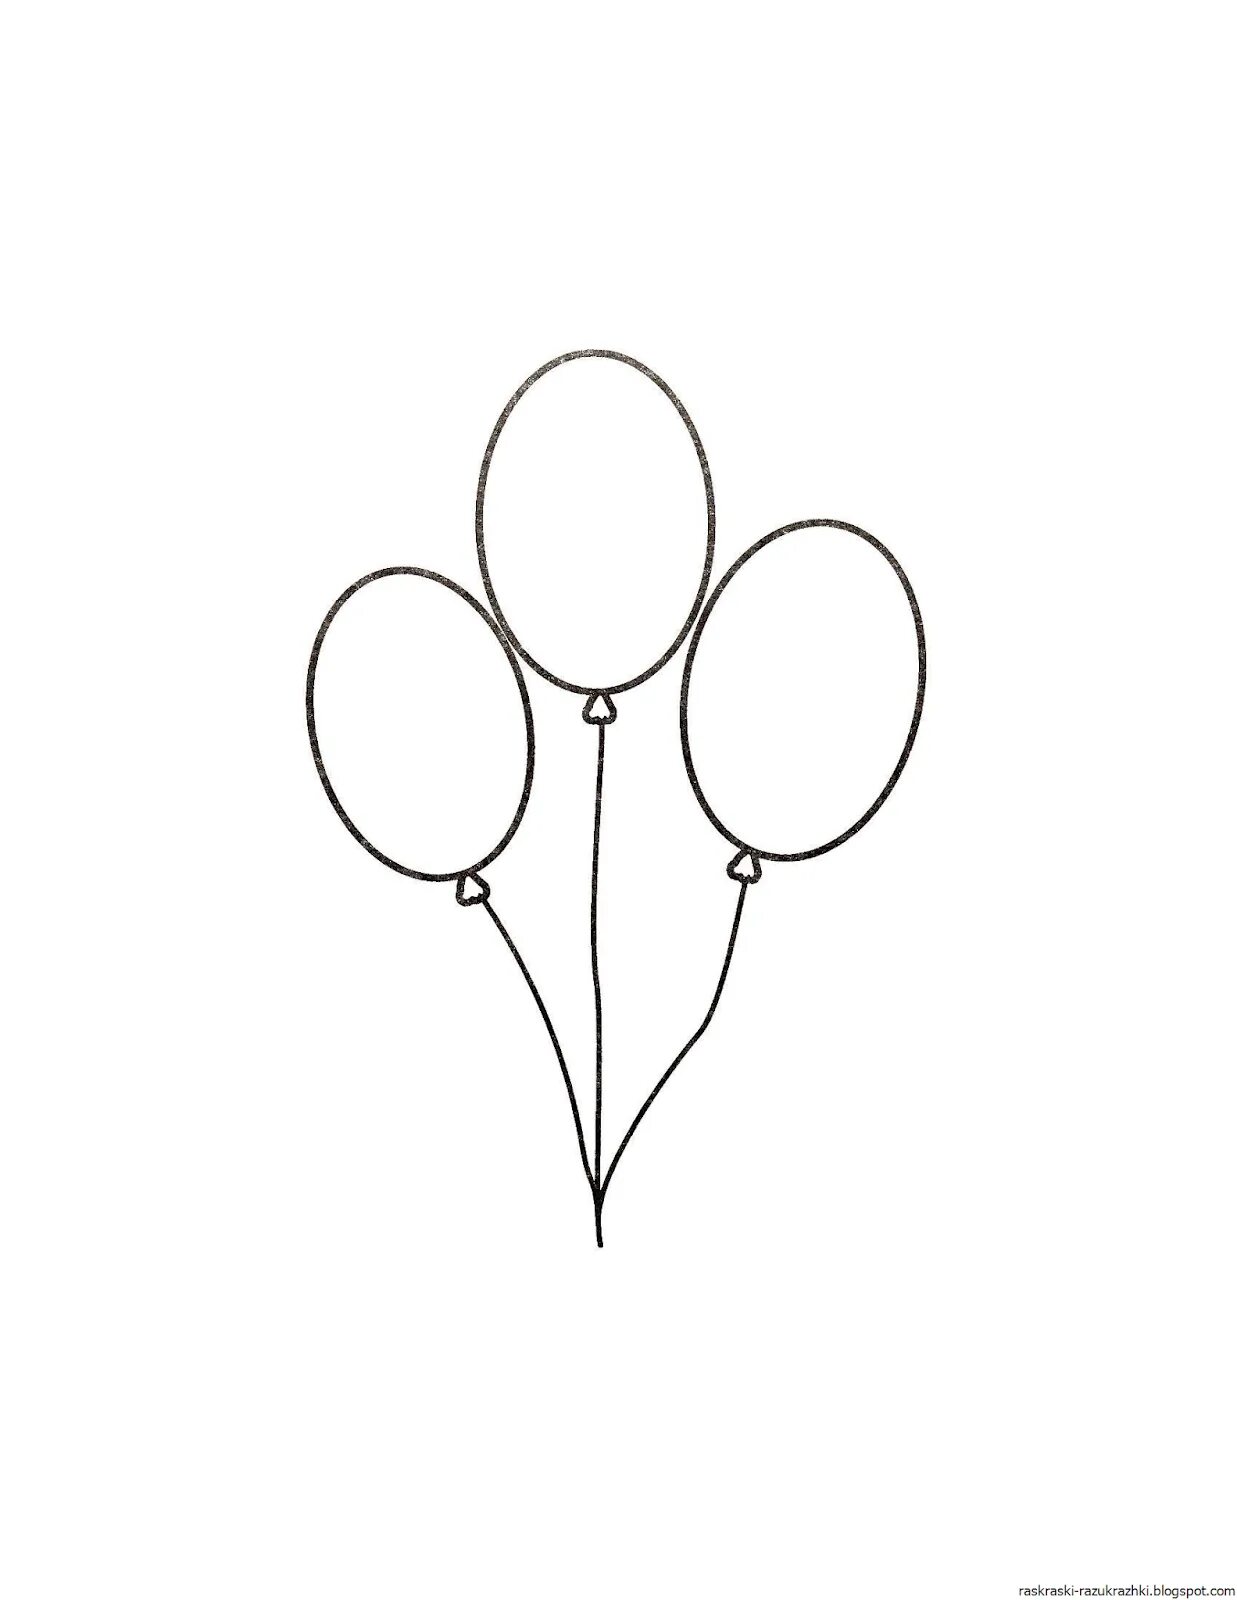 Cute ball coloring page for 2-3 year olds